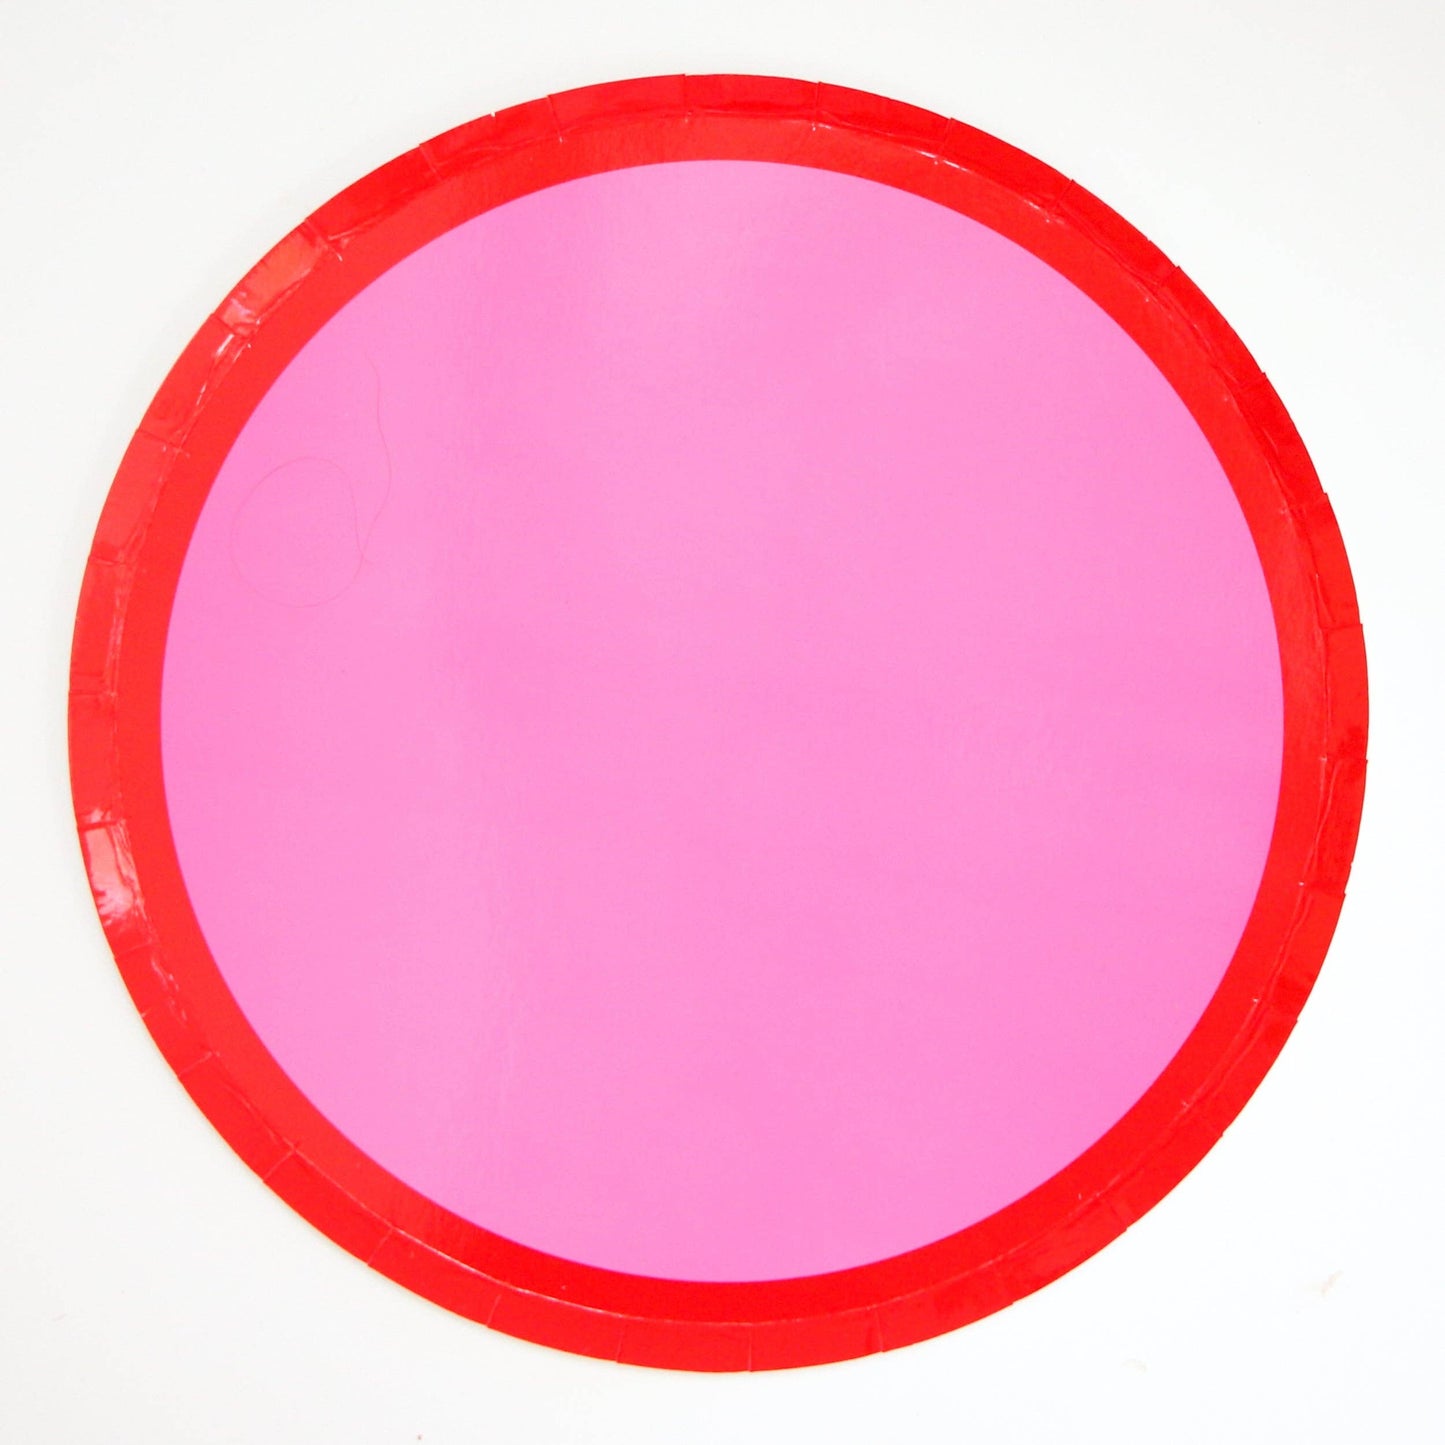 Kailo Chic - Red and pink color block paper plate